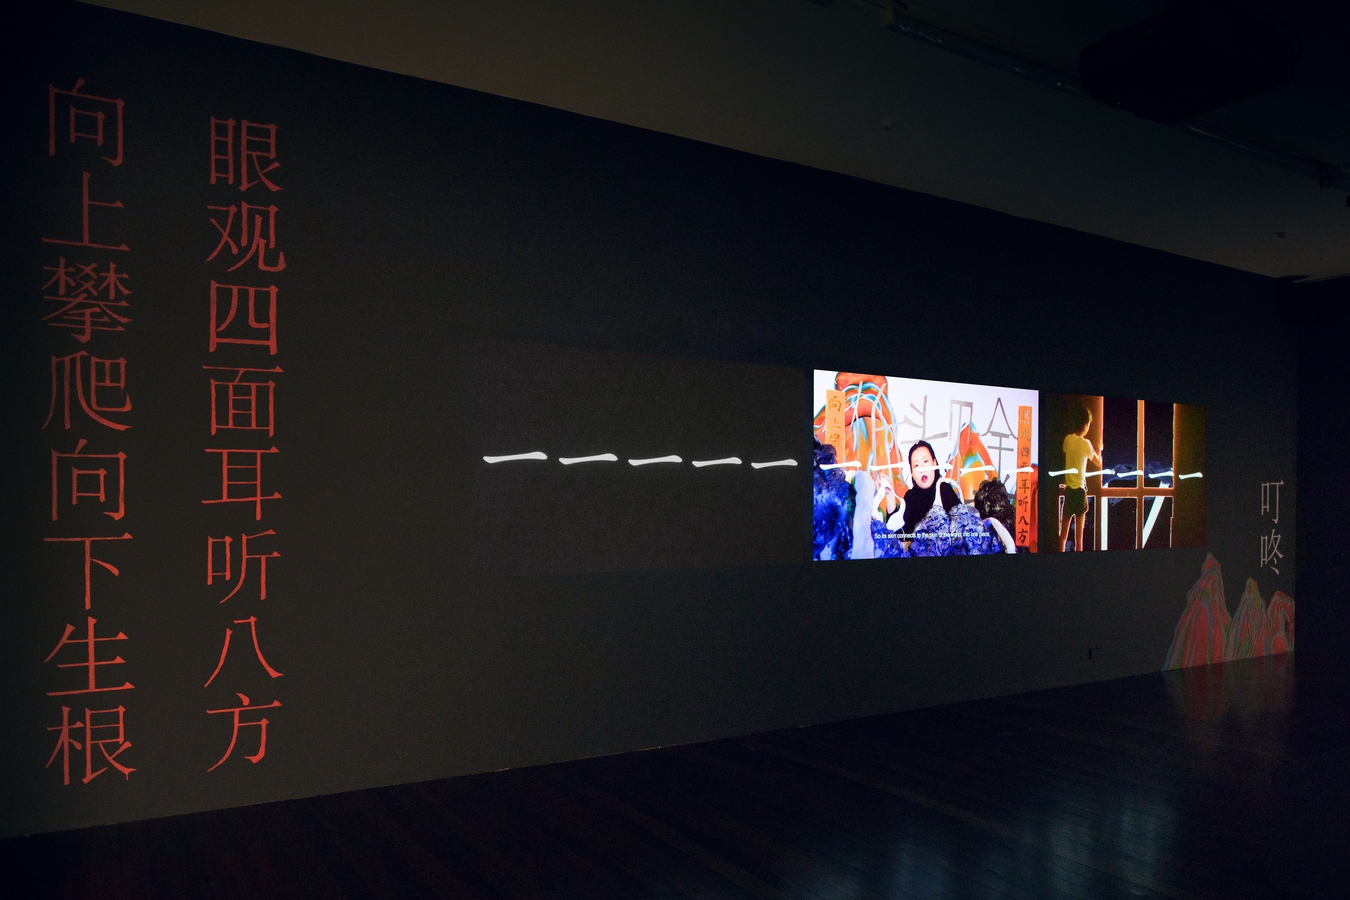 Image: Qianye Lin and Qianhe ‘AL’ Lin, Thus the Blast Carried It, Into the World 它便随着爆破, 冲向了世界 (installation view), 2021. Photo: Janneth Gil.